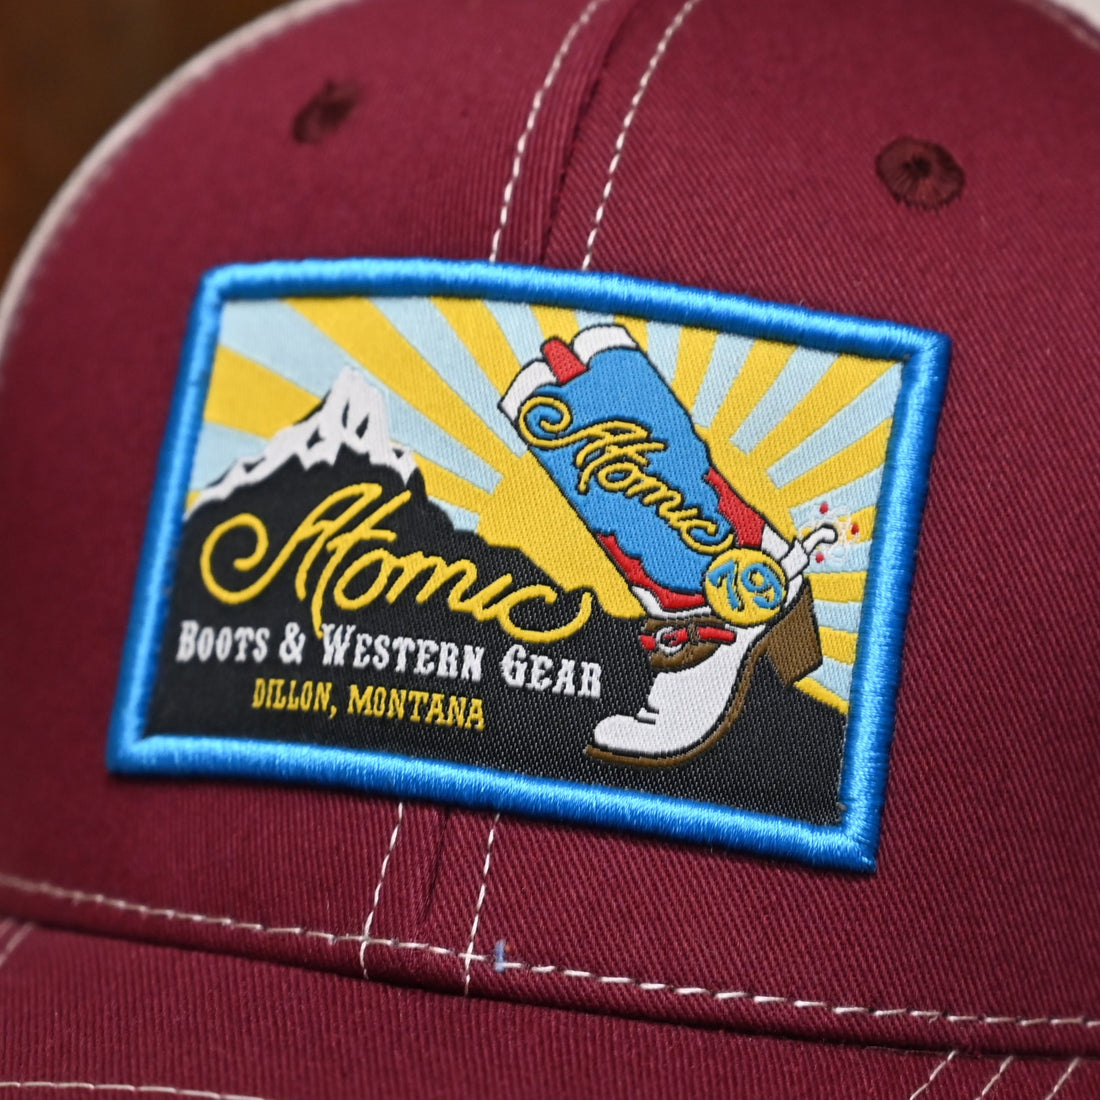 Atomic 79Trucker Cap with Sunrise Patch on Maroon view of logo